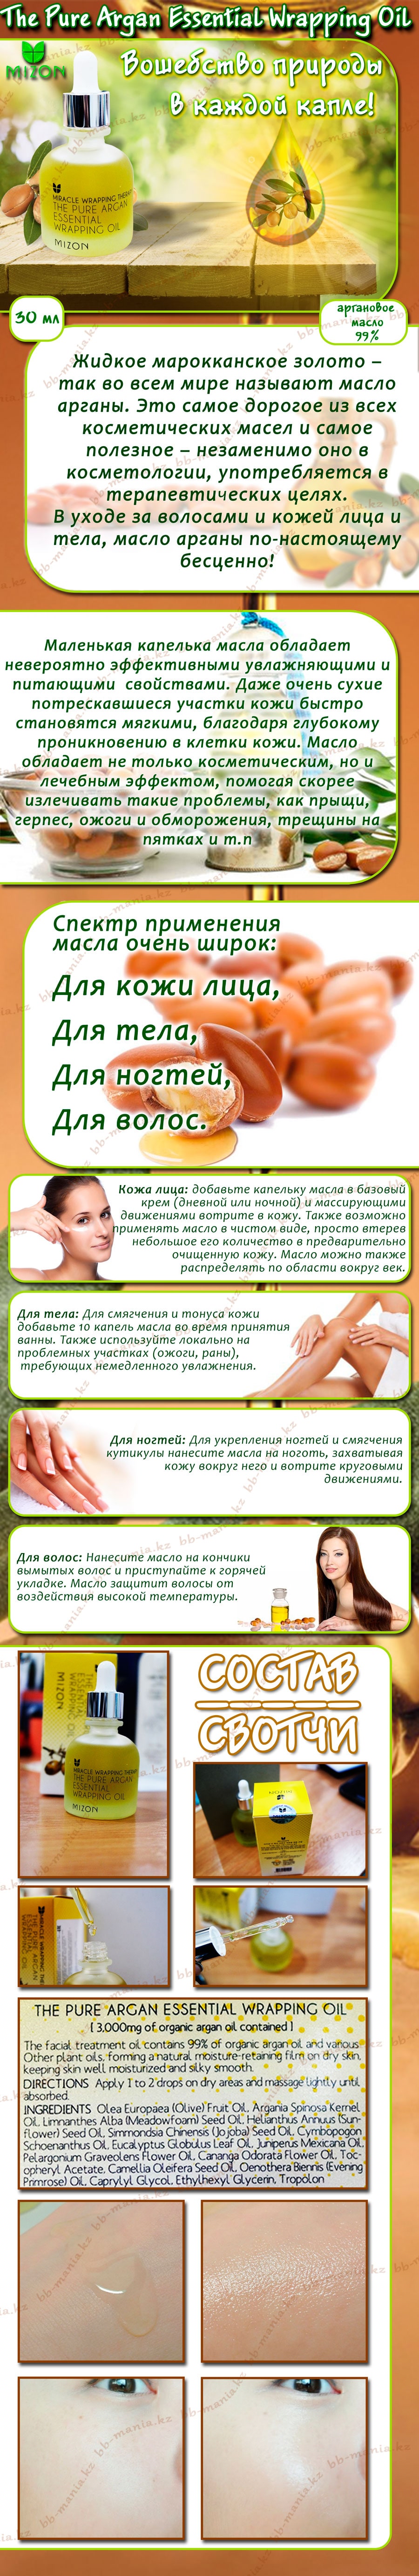 The-Pure-Argan-Essential-Wrapping-Oil-min